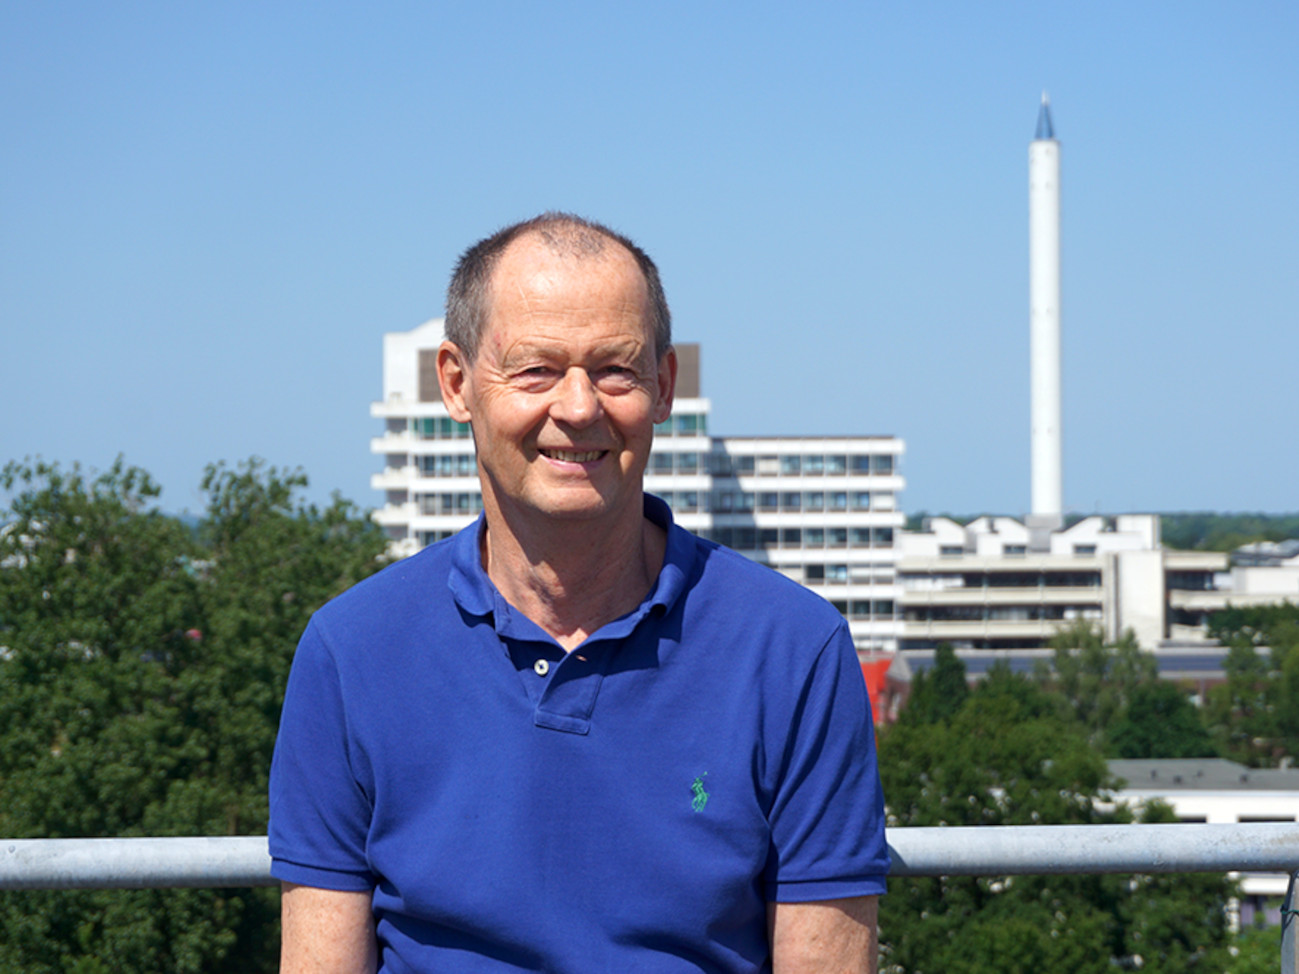 Dr. Justus Notholt stands on the rooftop terrace of NW1 Building. In the background, you can see the university campus with its Drop Tower.